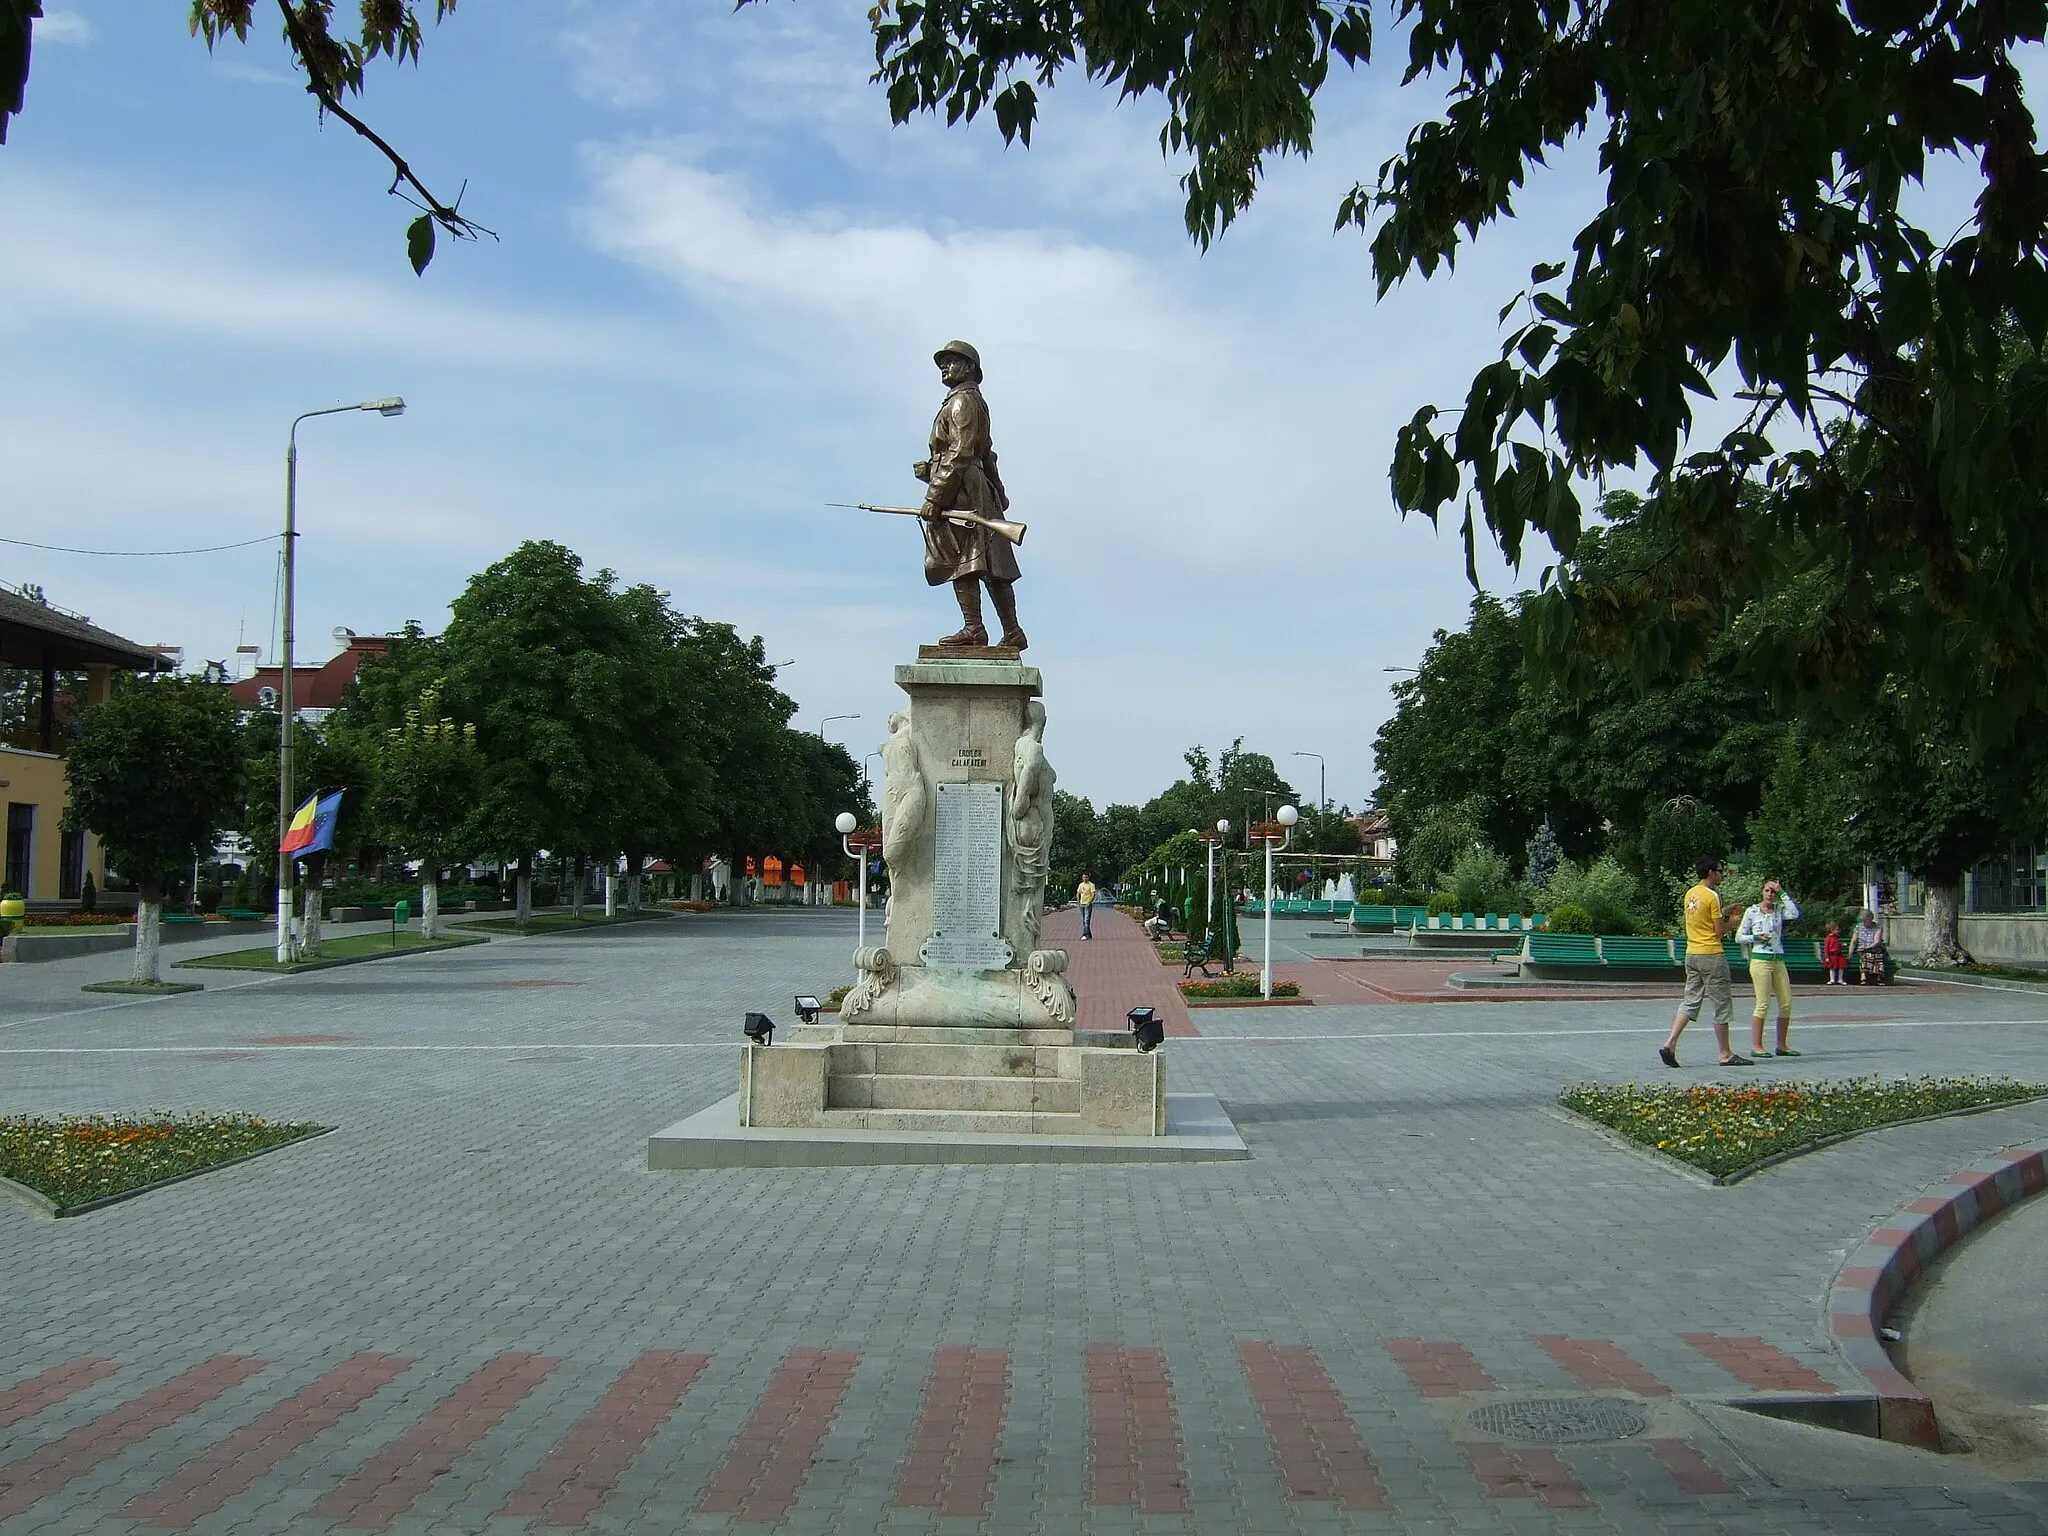 Photo showing: Photograph of a monument in Calafat, supposedly near Tudor Vladimirescu boulevard. It shows a soldier with helmet and gun.